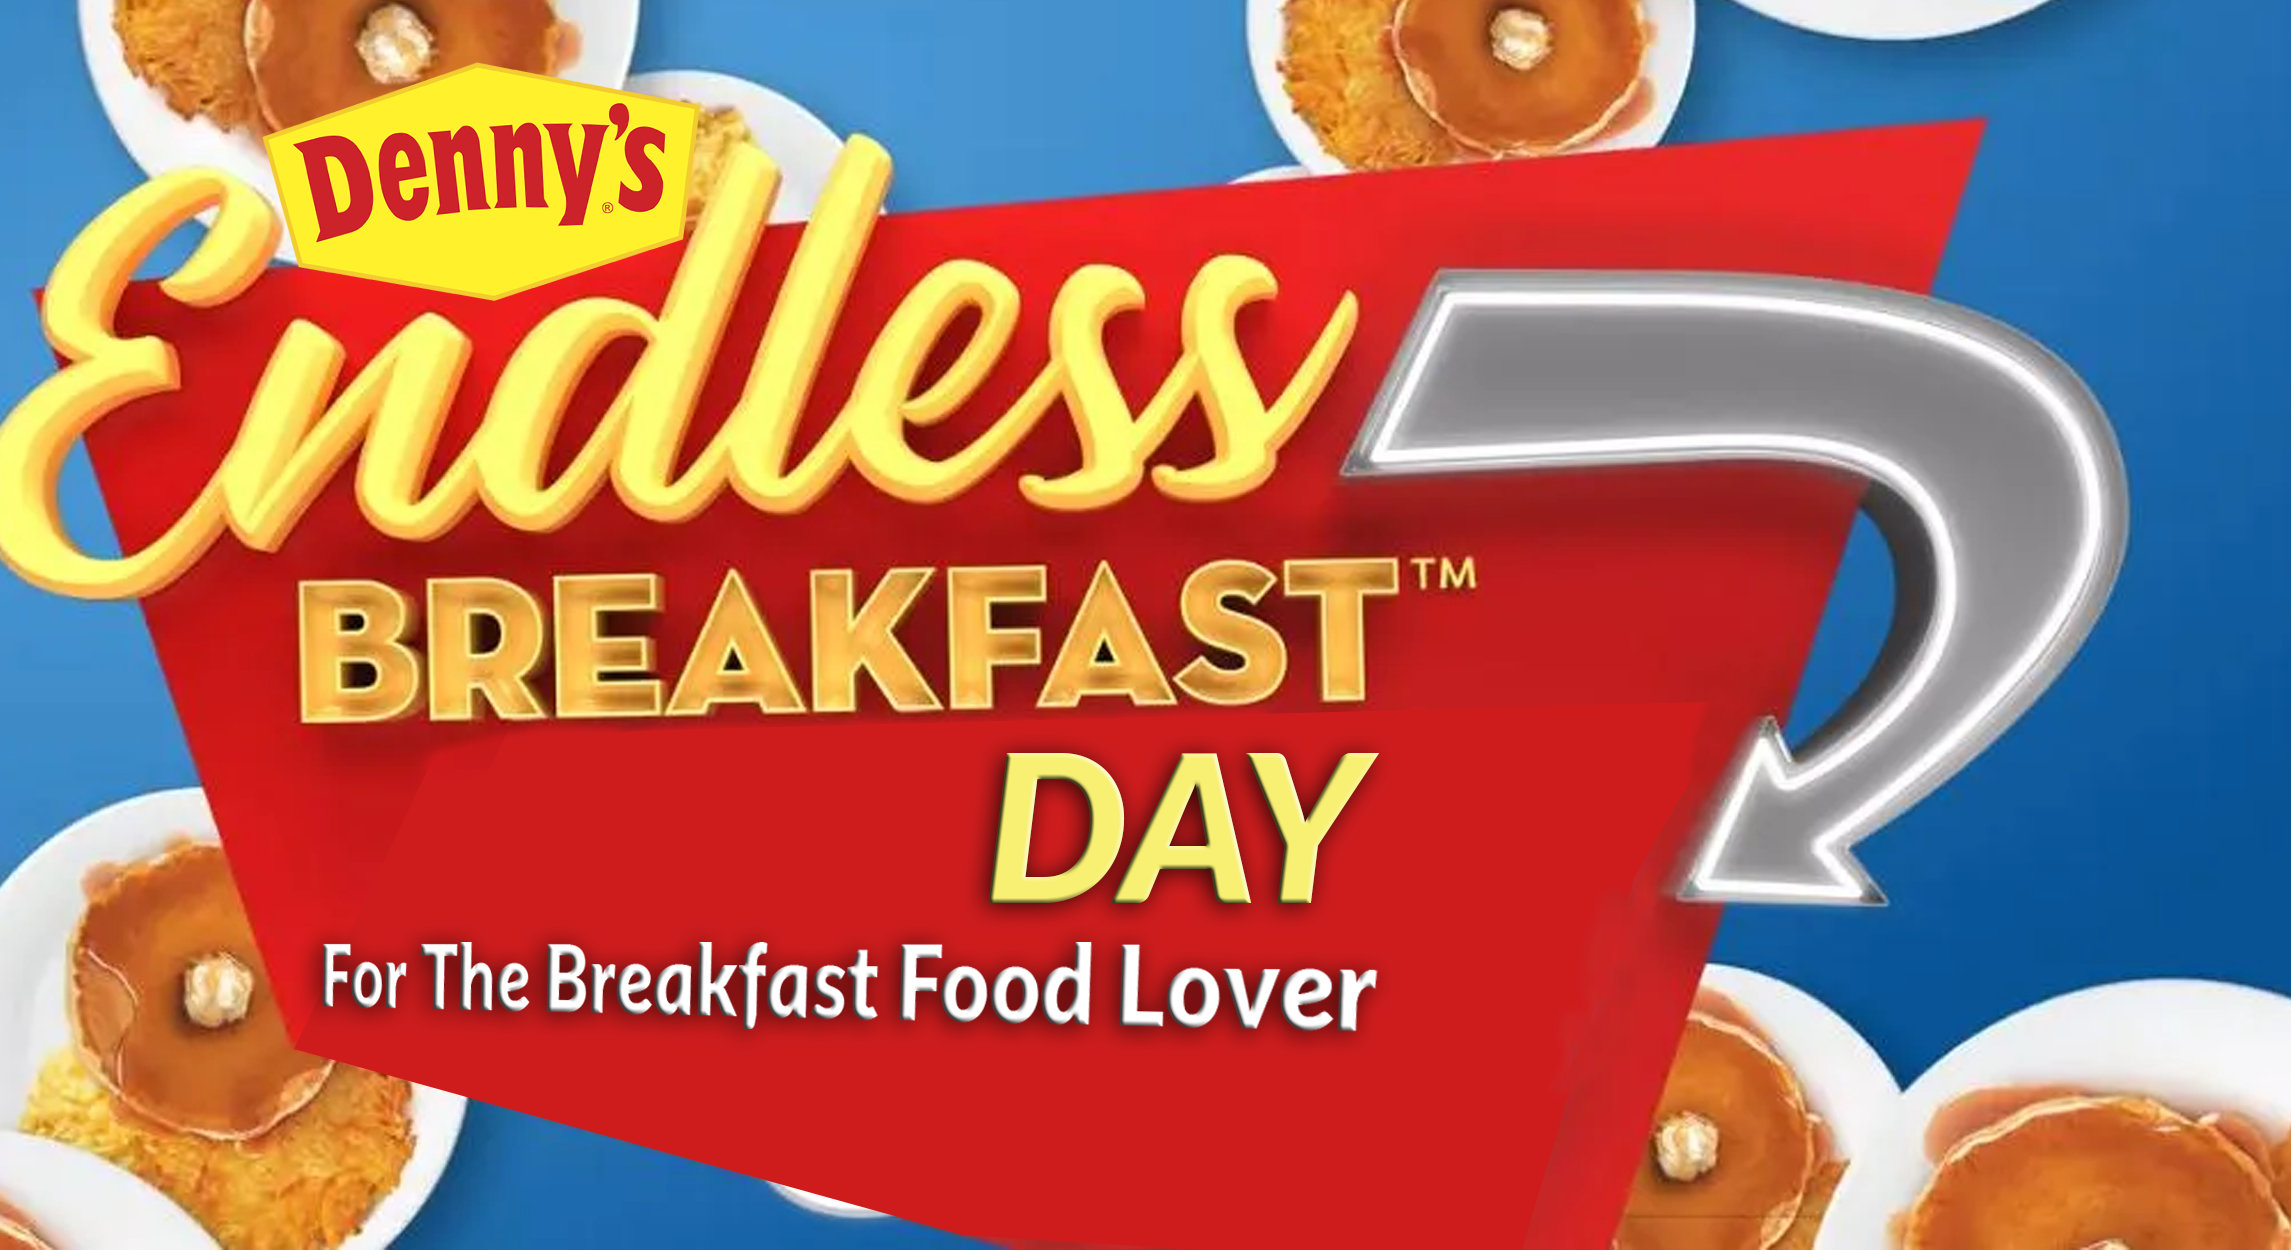 Dennys Endless Breakfast Day For The Breakfast Food Lover